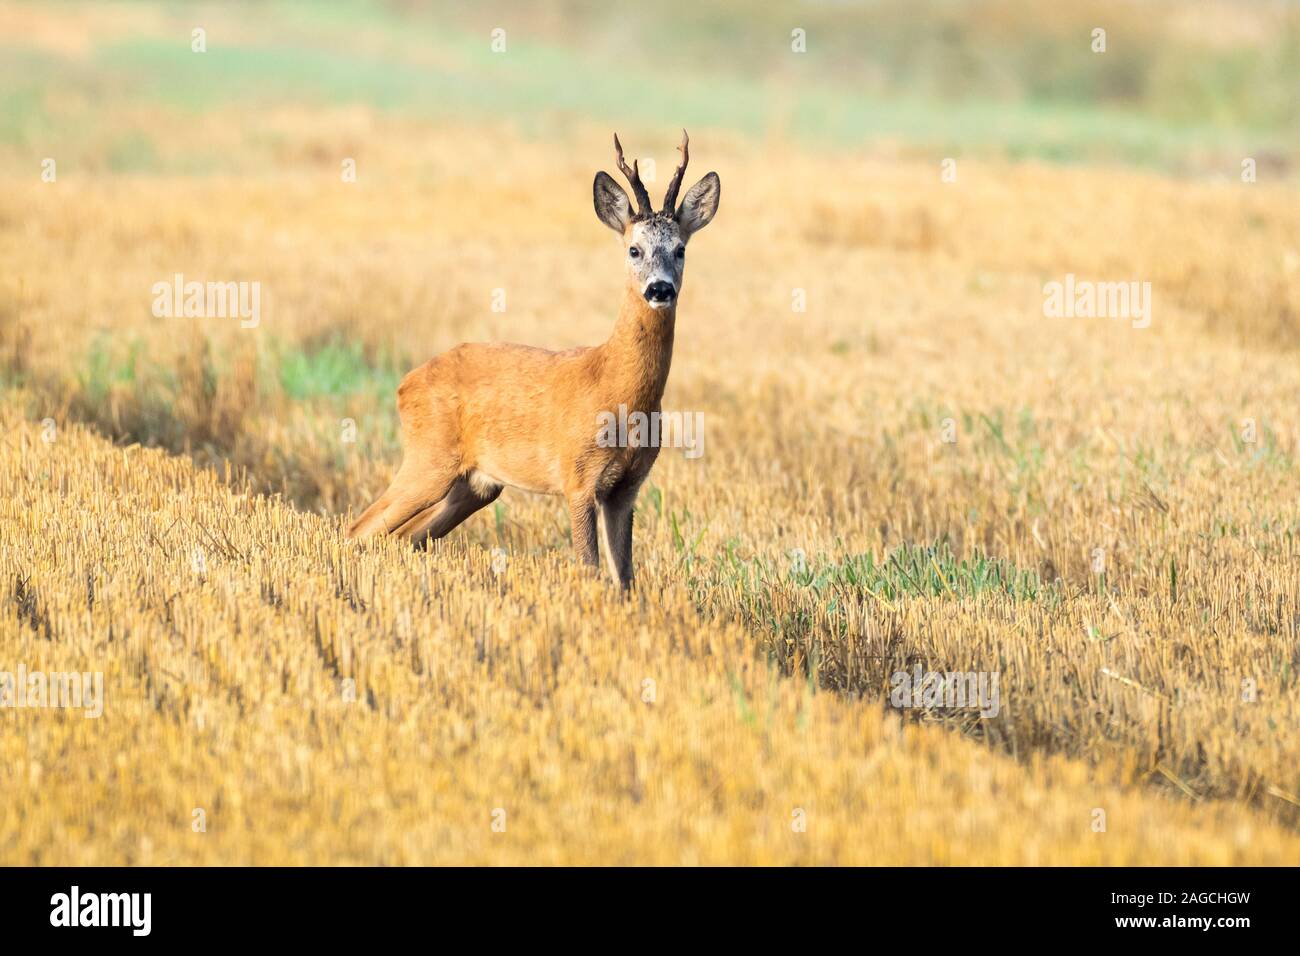 European roe deer (capreolus capreolus) standing in a rut among mown grain in the stubble in the light of the rising sun, Poland Stock Photo